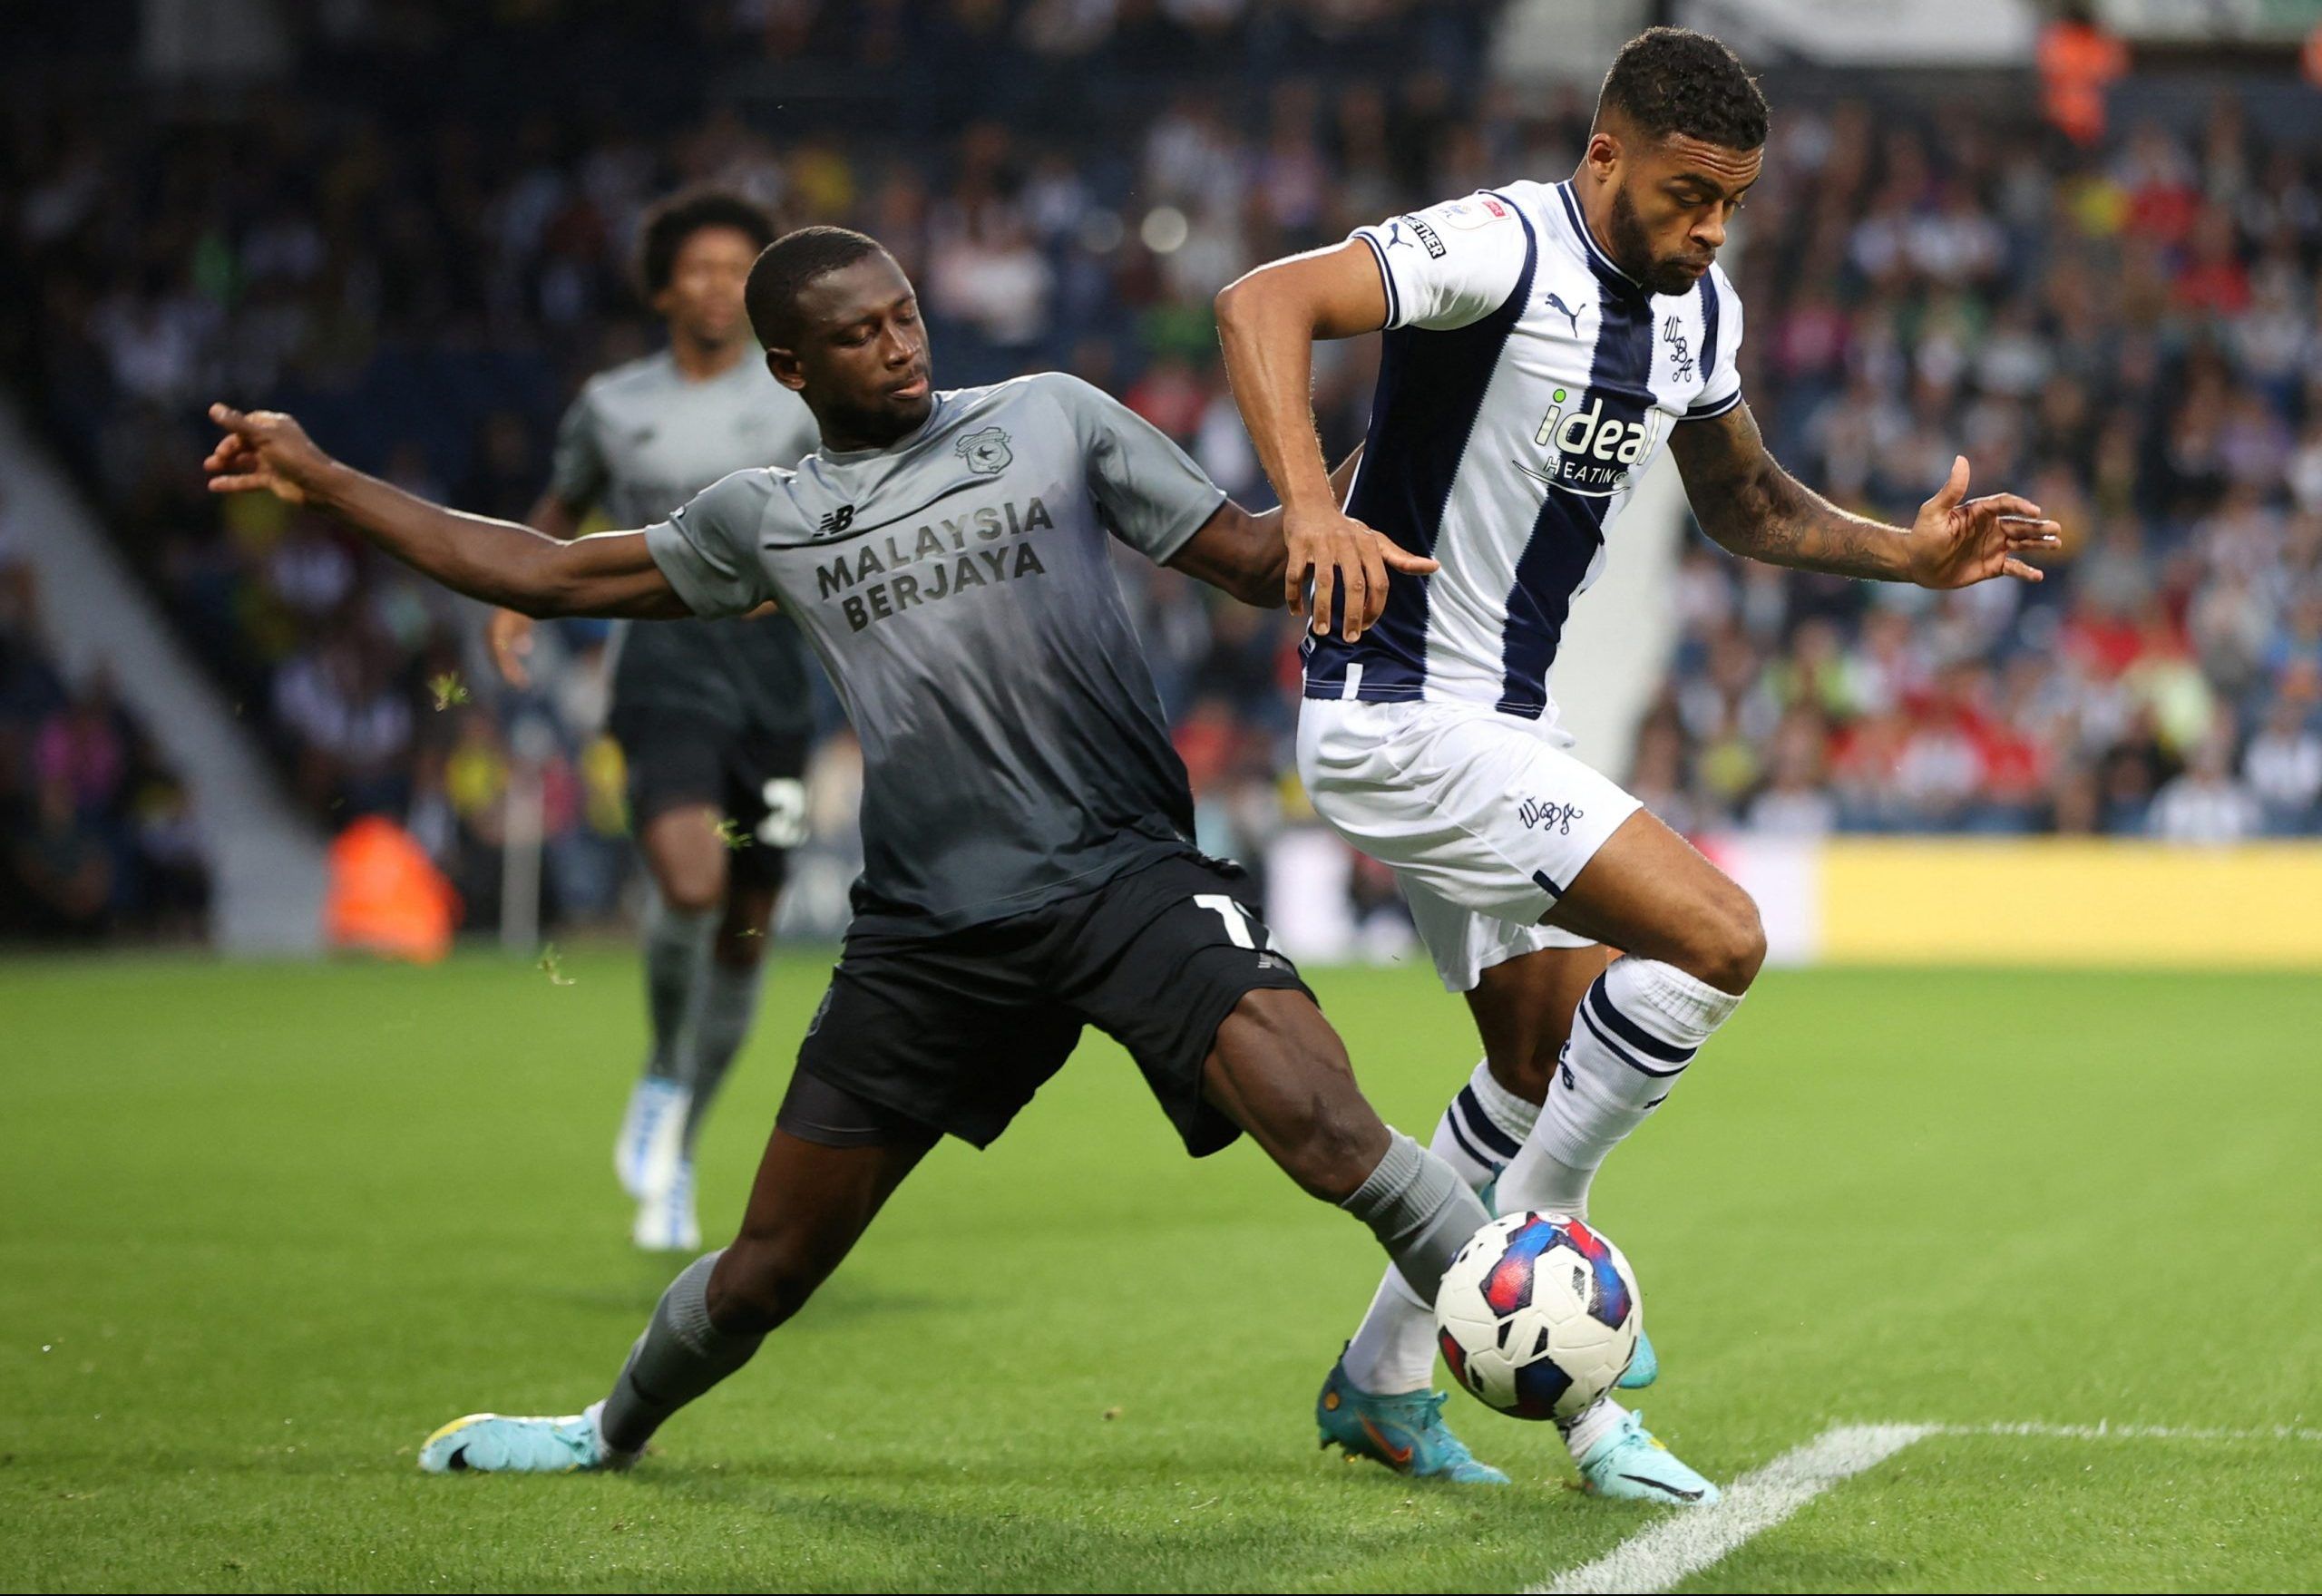 Soccer Football - Championship - West Bromwich Albion v Cardiff City - The Hawthorns, West Bromwich, Britain - August 17, 2022  Cardiff City's Jamilu Collins in action with West Bromwich Albion's Darnell Furlong  Action Images/Molly Darlington    EDITORIAL USE ONLY. No use with unauthorized audio, video, data, fixture lists, club/league logos or 